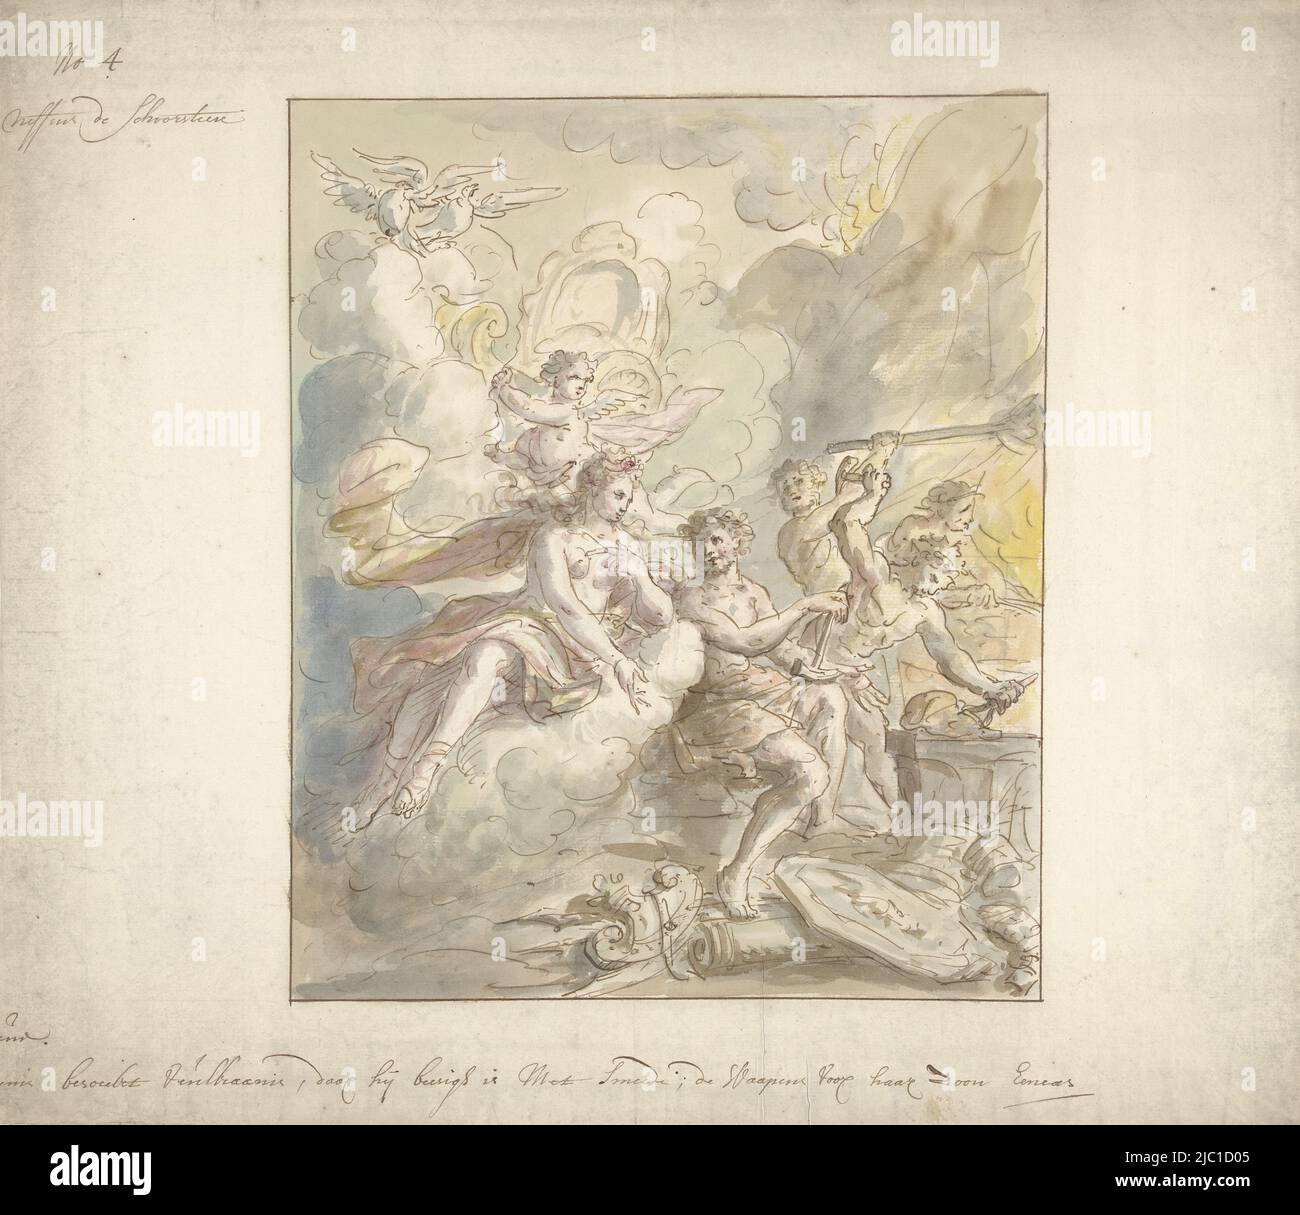 Allegory on the Fire: Venus in the forge of Vulcan, Design for a room painting with allegory on the Fire, draughtsman: Elias van Nijmegen, 1677 - 1755, paper, brush, pen, h 387 mm × w 443 mm Stock Photo